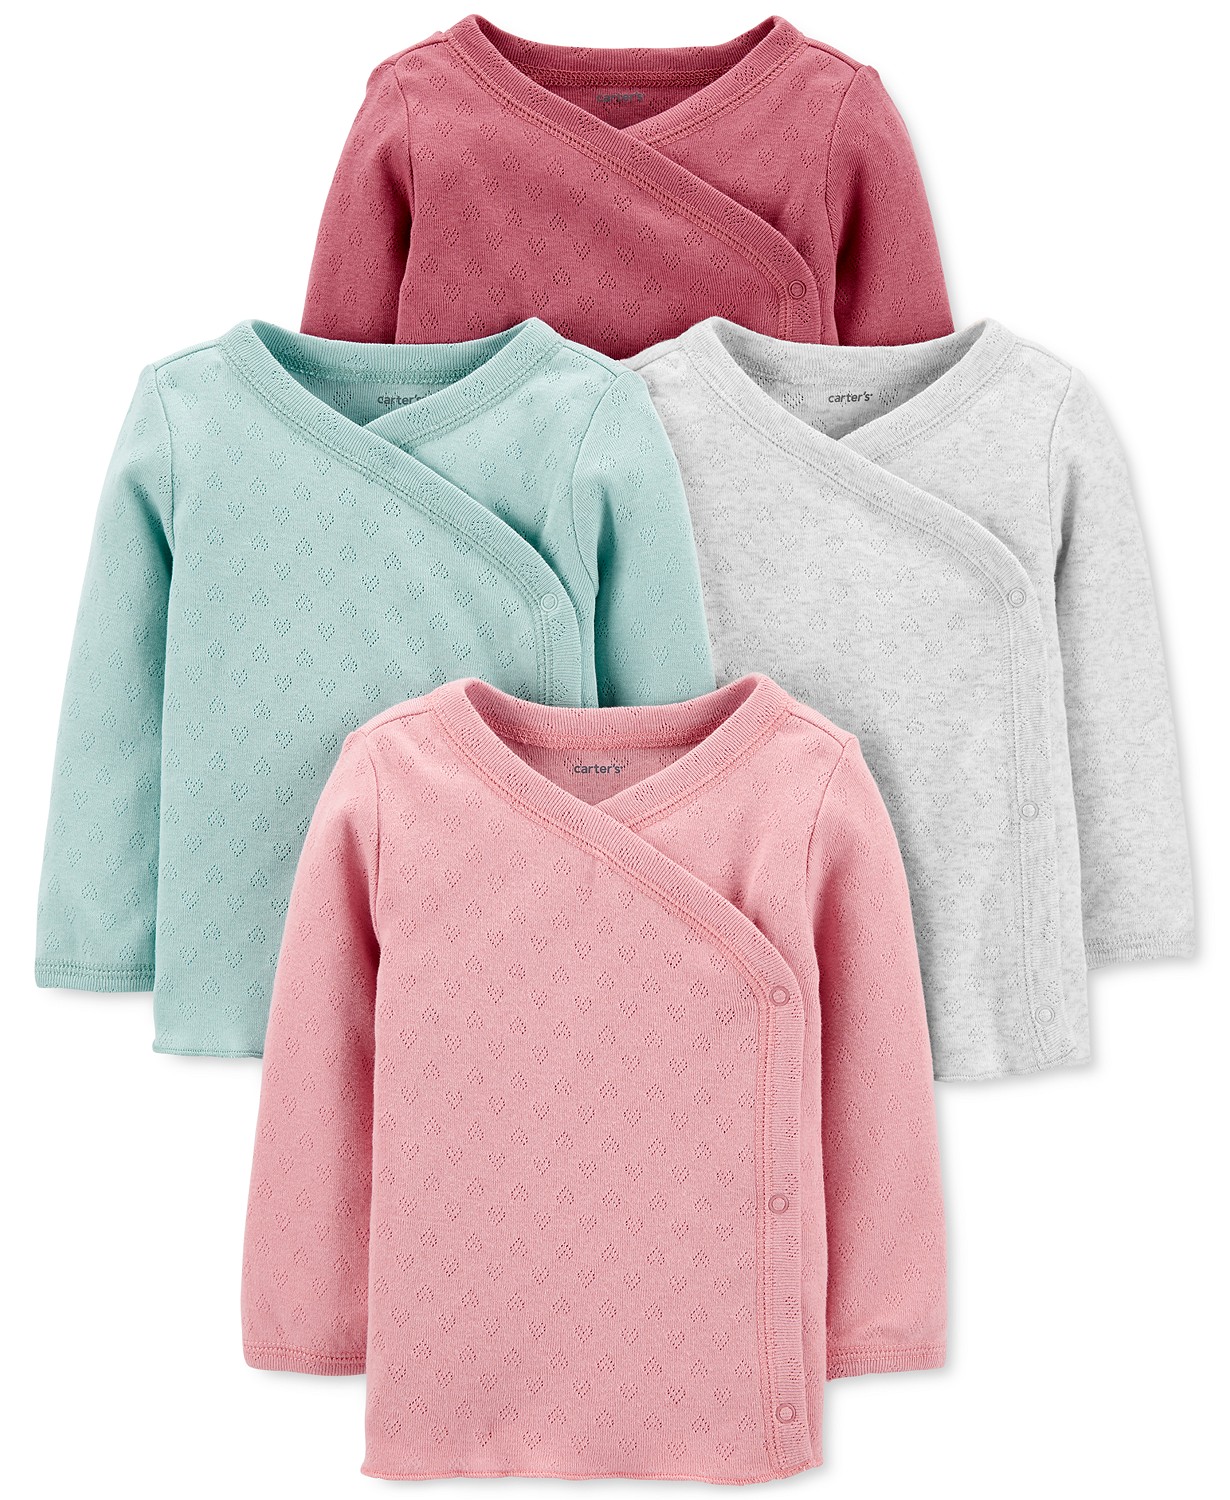 Baby Girls 4-Pack Long-Sleeve Side-Snap Cotton Shirts